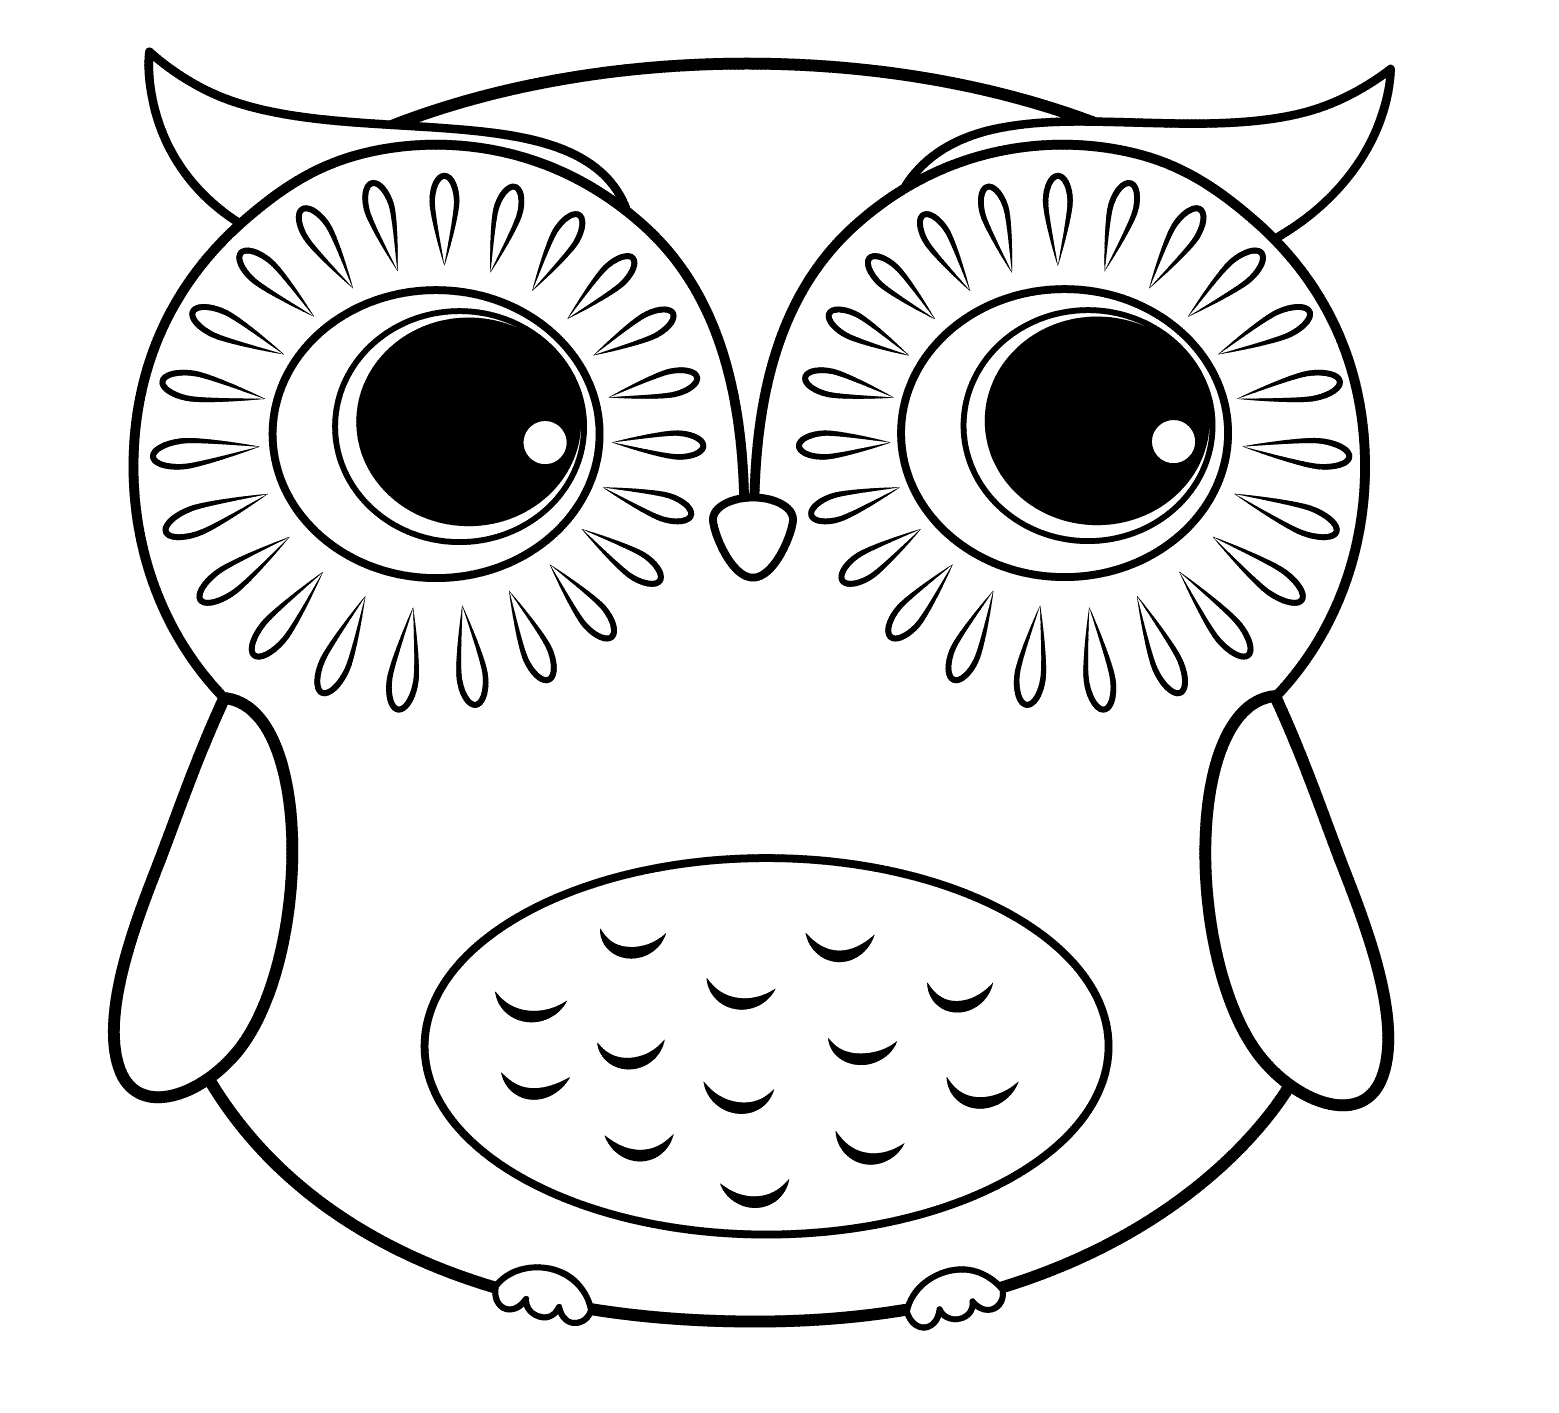 Adorable Cartoon Owl Coloring Pages